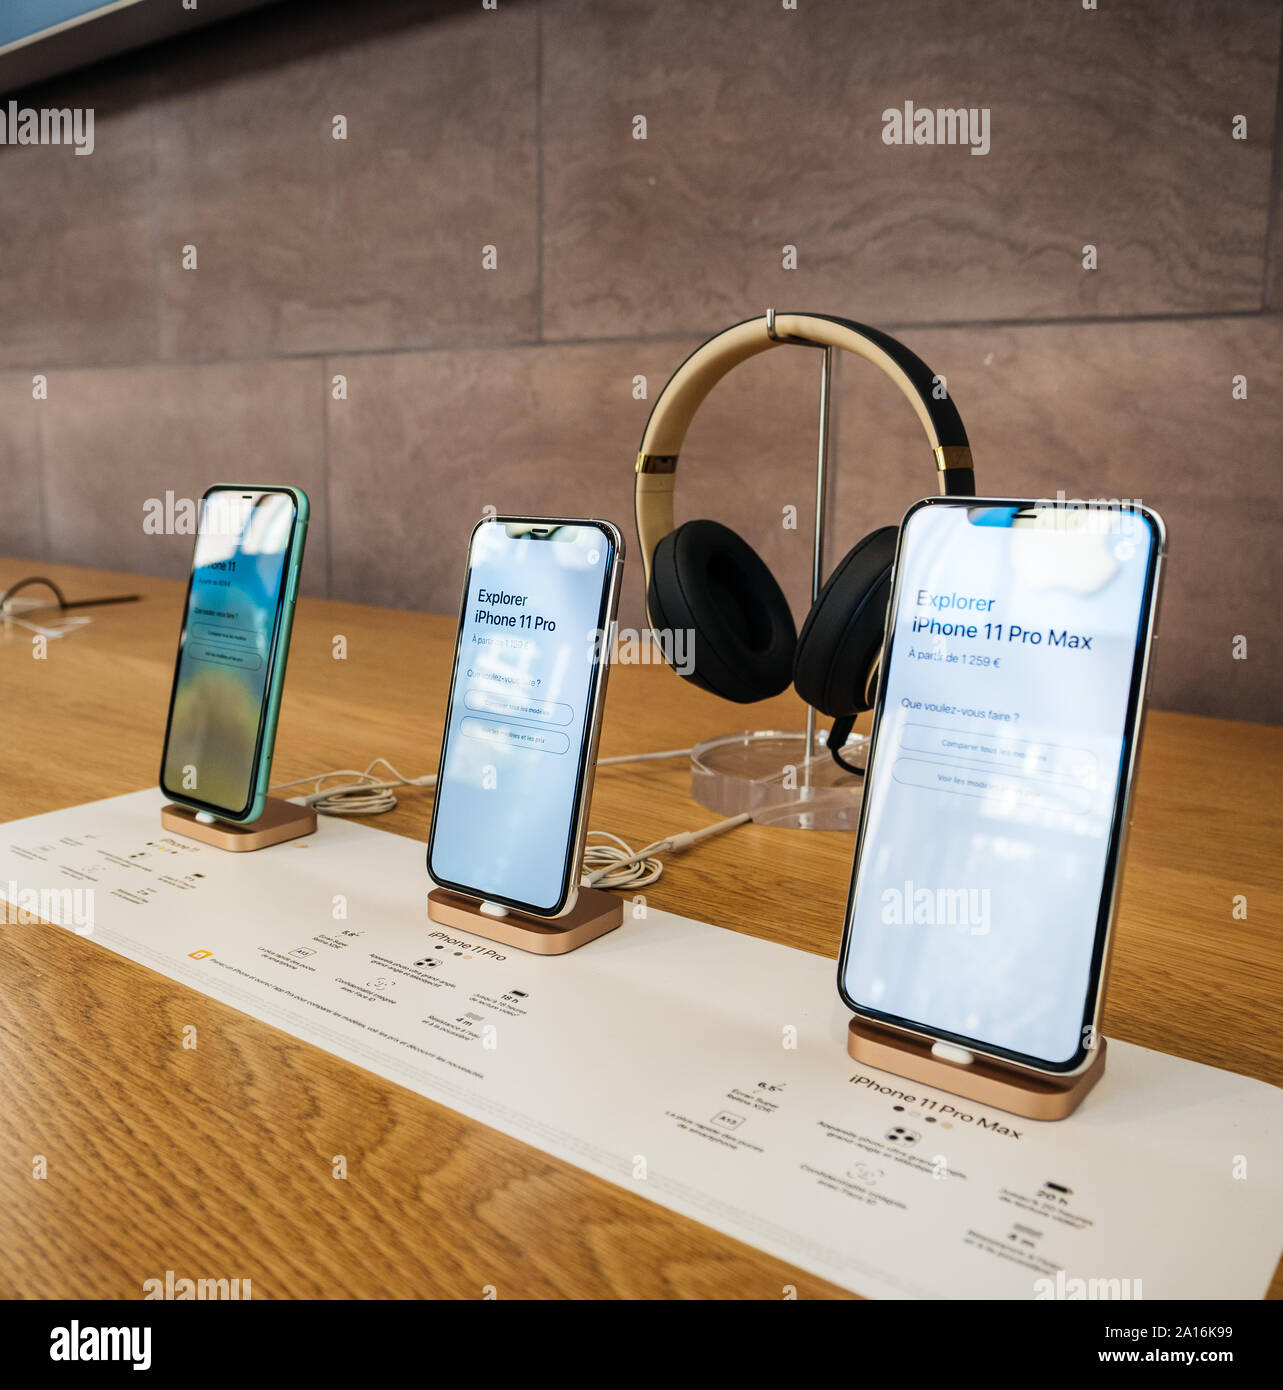 Paris, France - Sep 20, 2019: The new iPhone 11, 11 Pro and Pro Max range displayed in Apple Store next to Beats by Dr Dre Headphones - square image Stock Photo